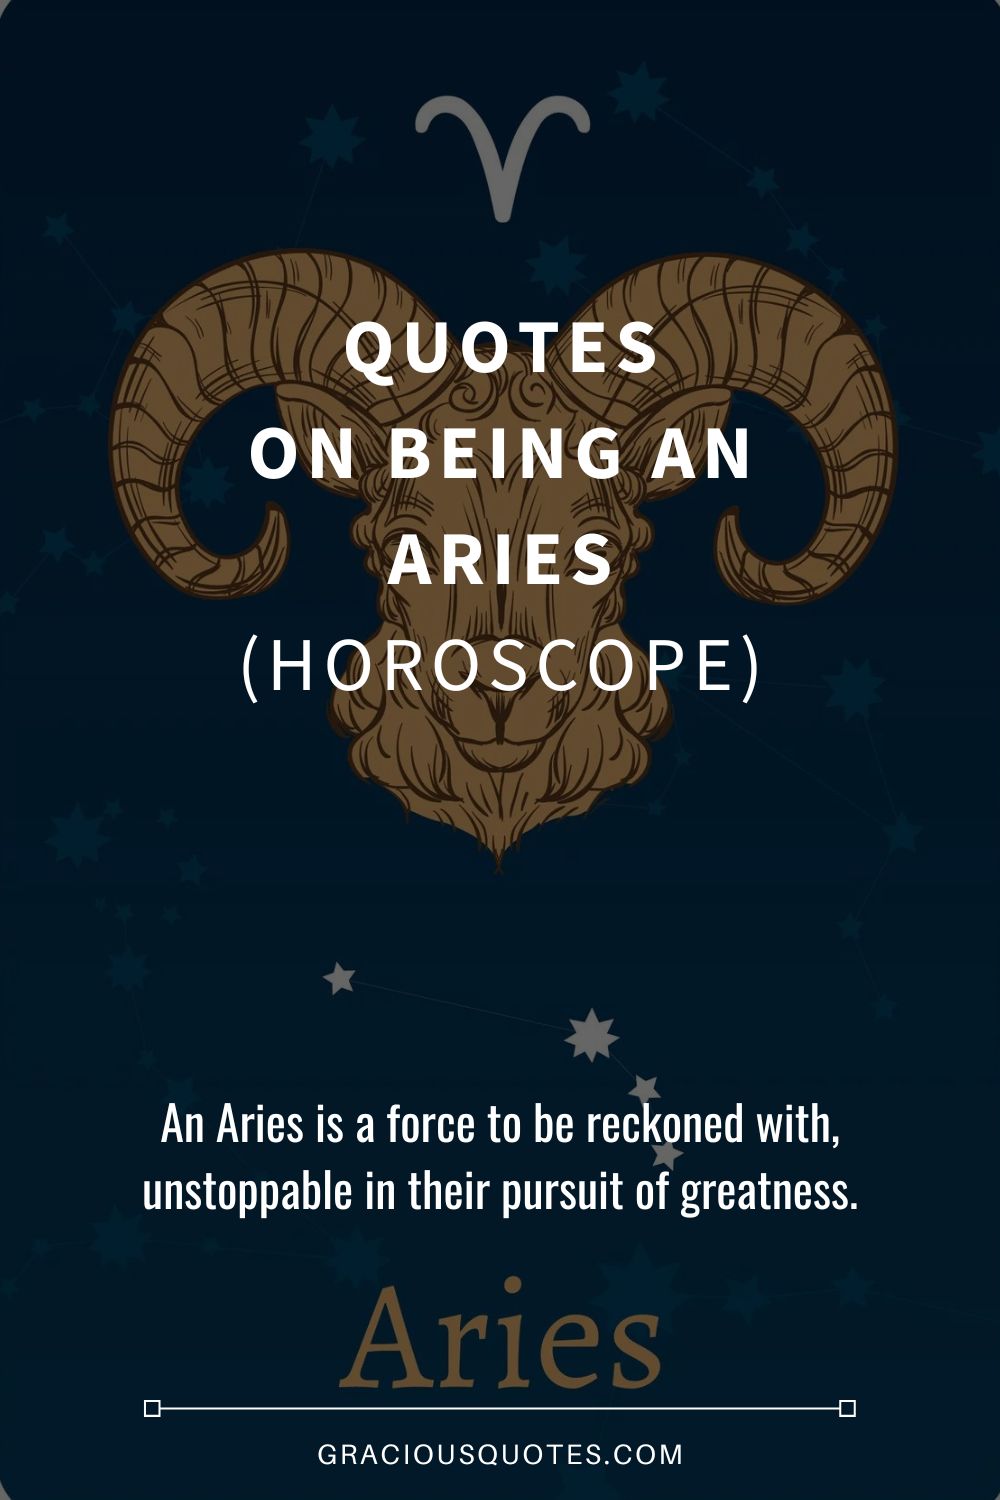 Quotes on Being an Aries (HOROSCOPE) - Gracious Quotes